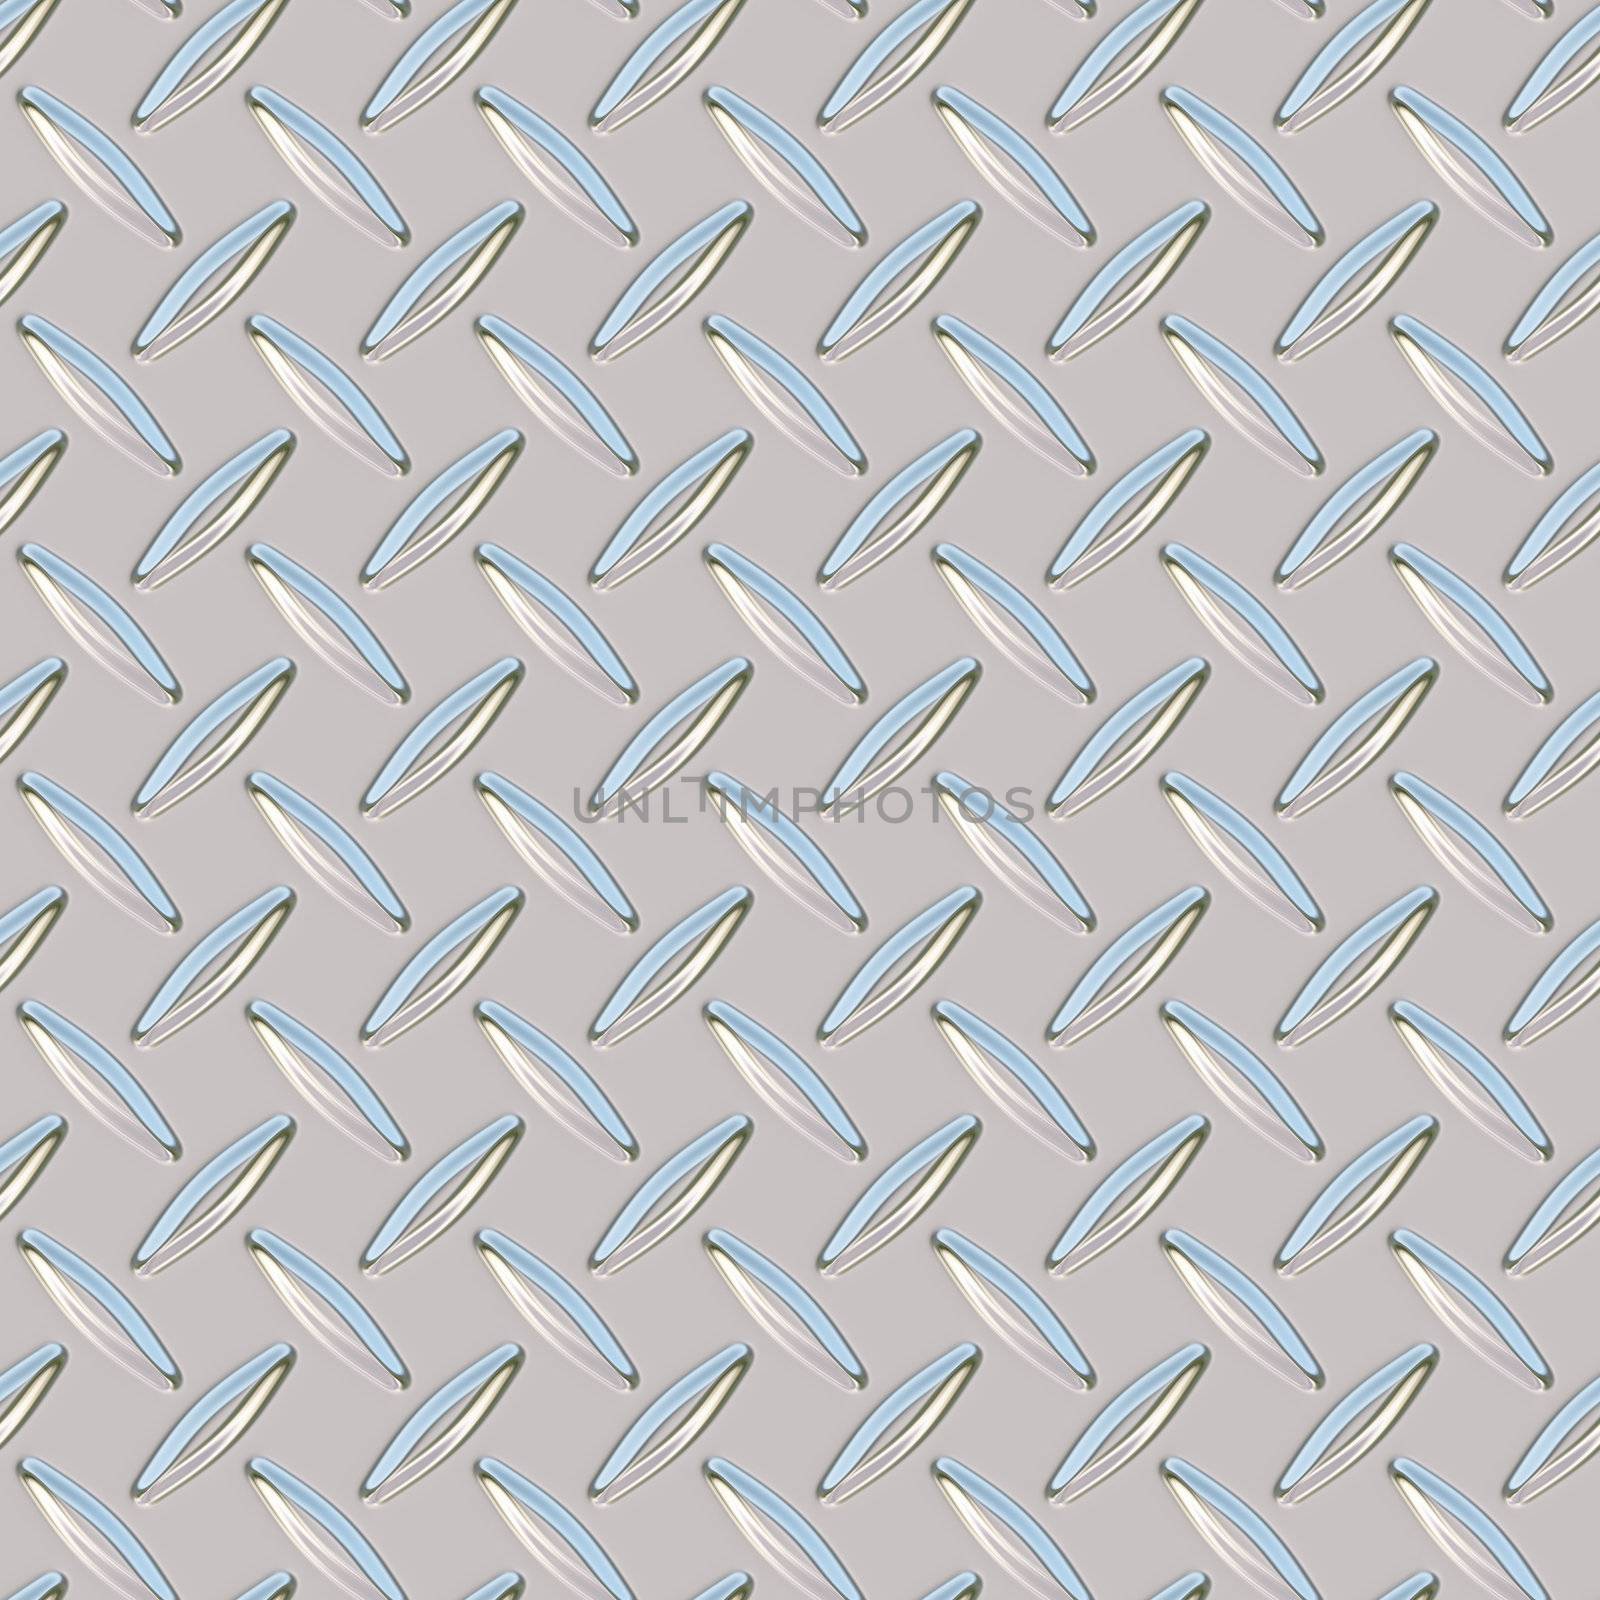 A chrome, diamond plate texture that can be tiled for a high-res background, no matter what the size.  Works great for both print and web design.